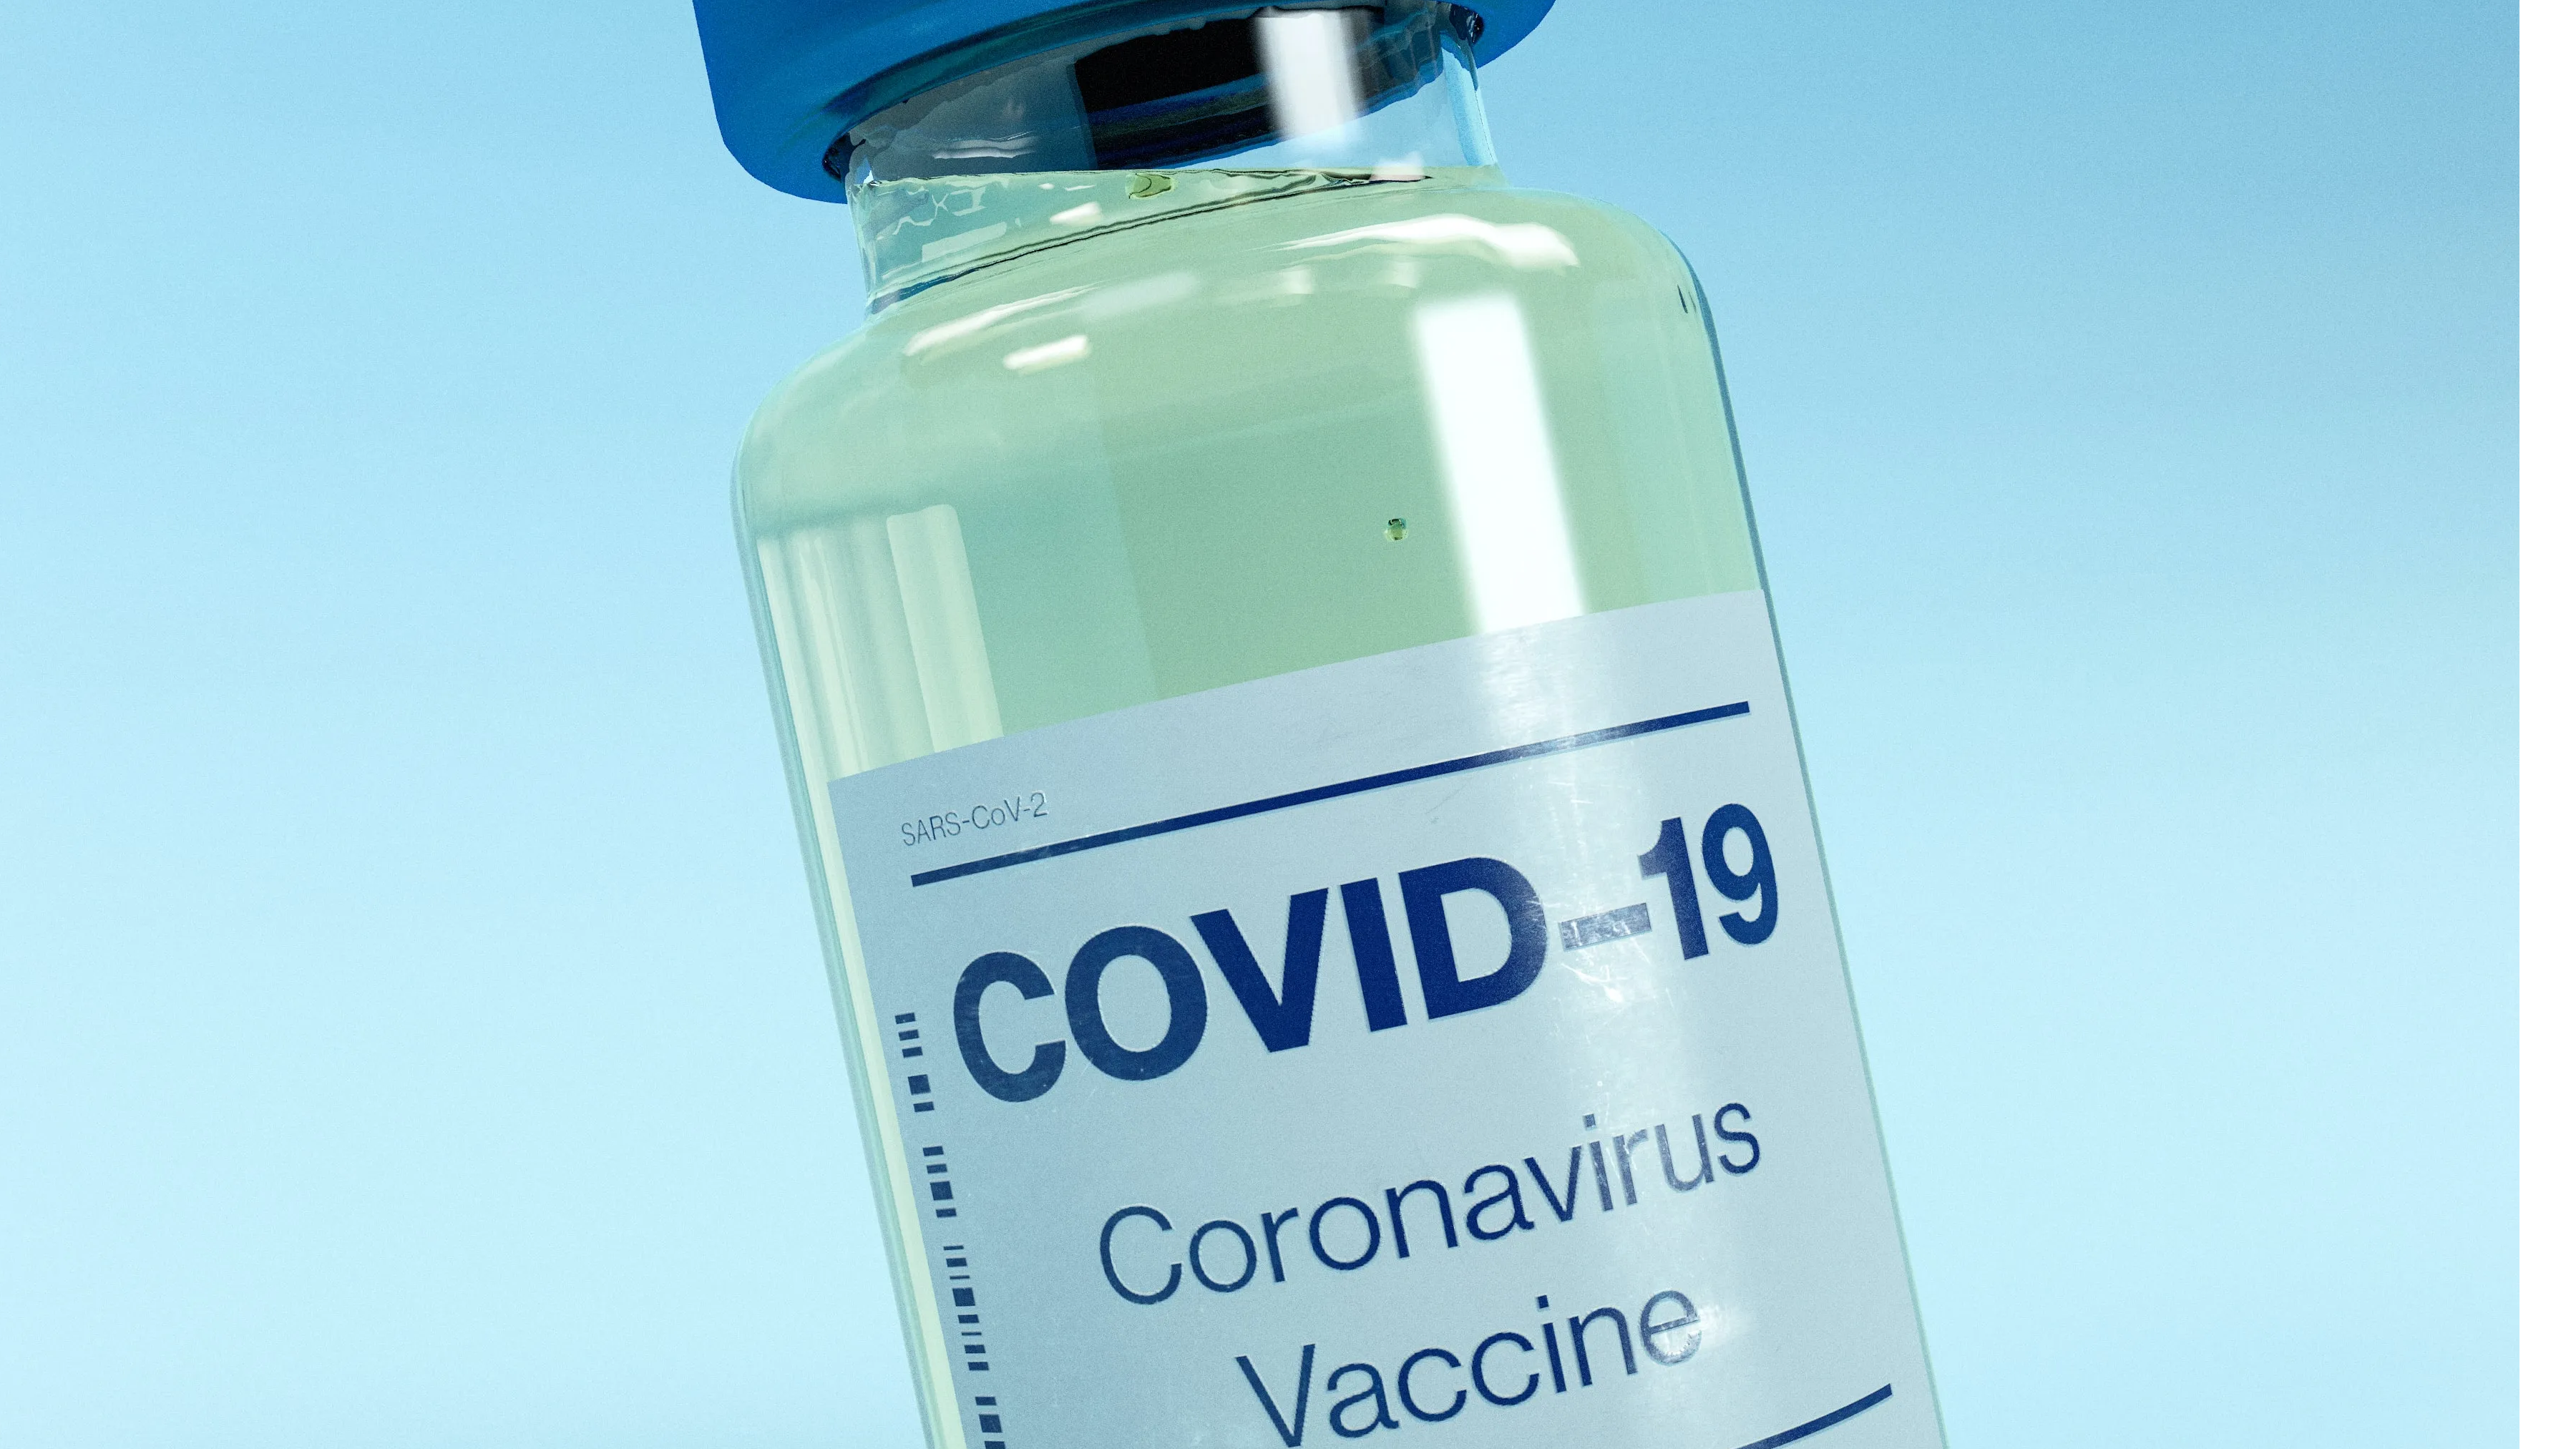 Gujarat man contracts COVID-19, days after receving second shot of coronavirus vaccine